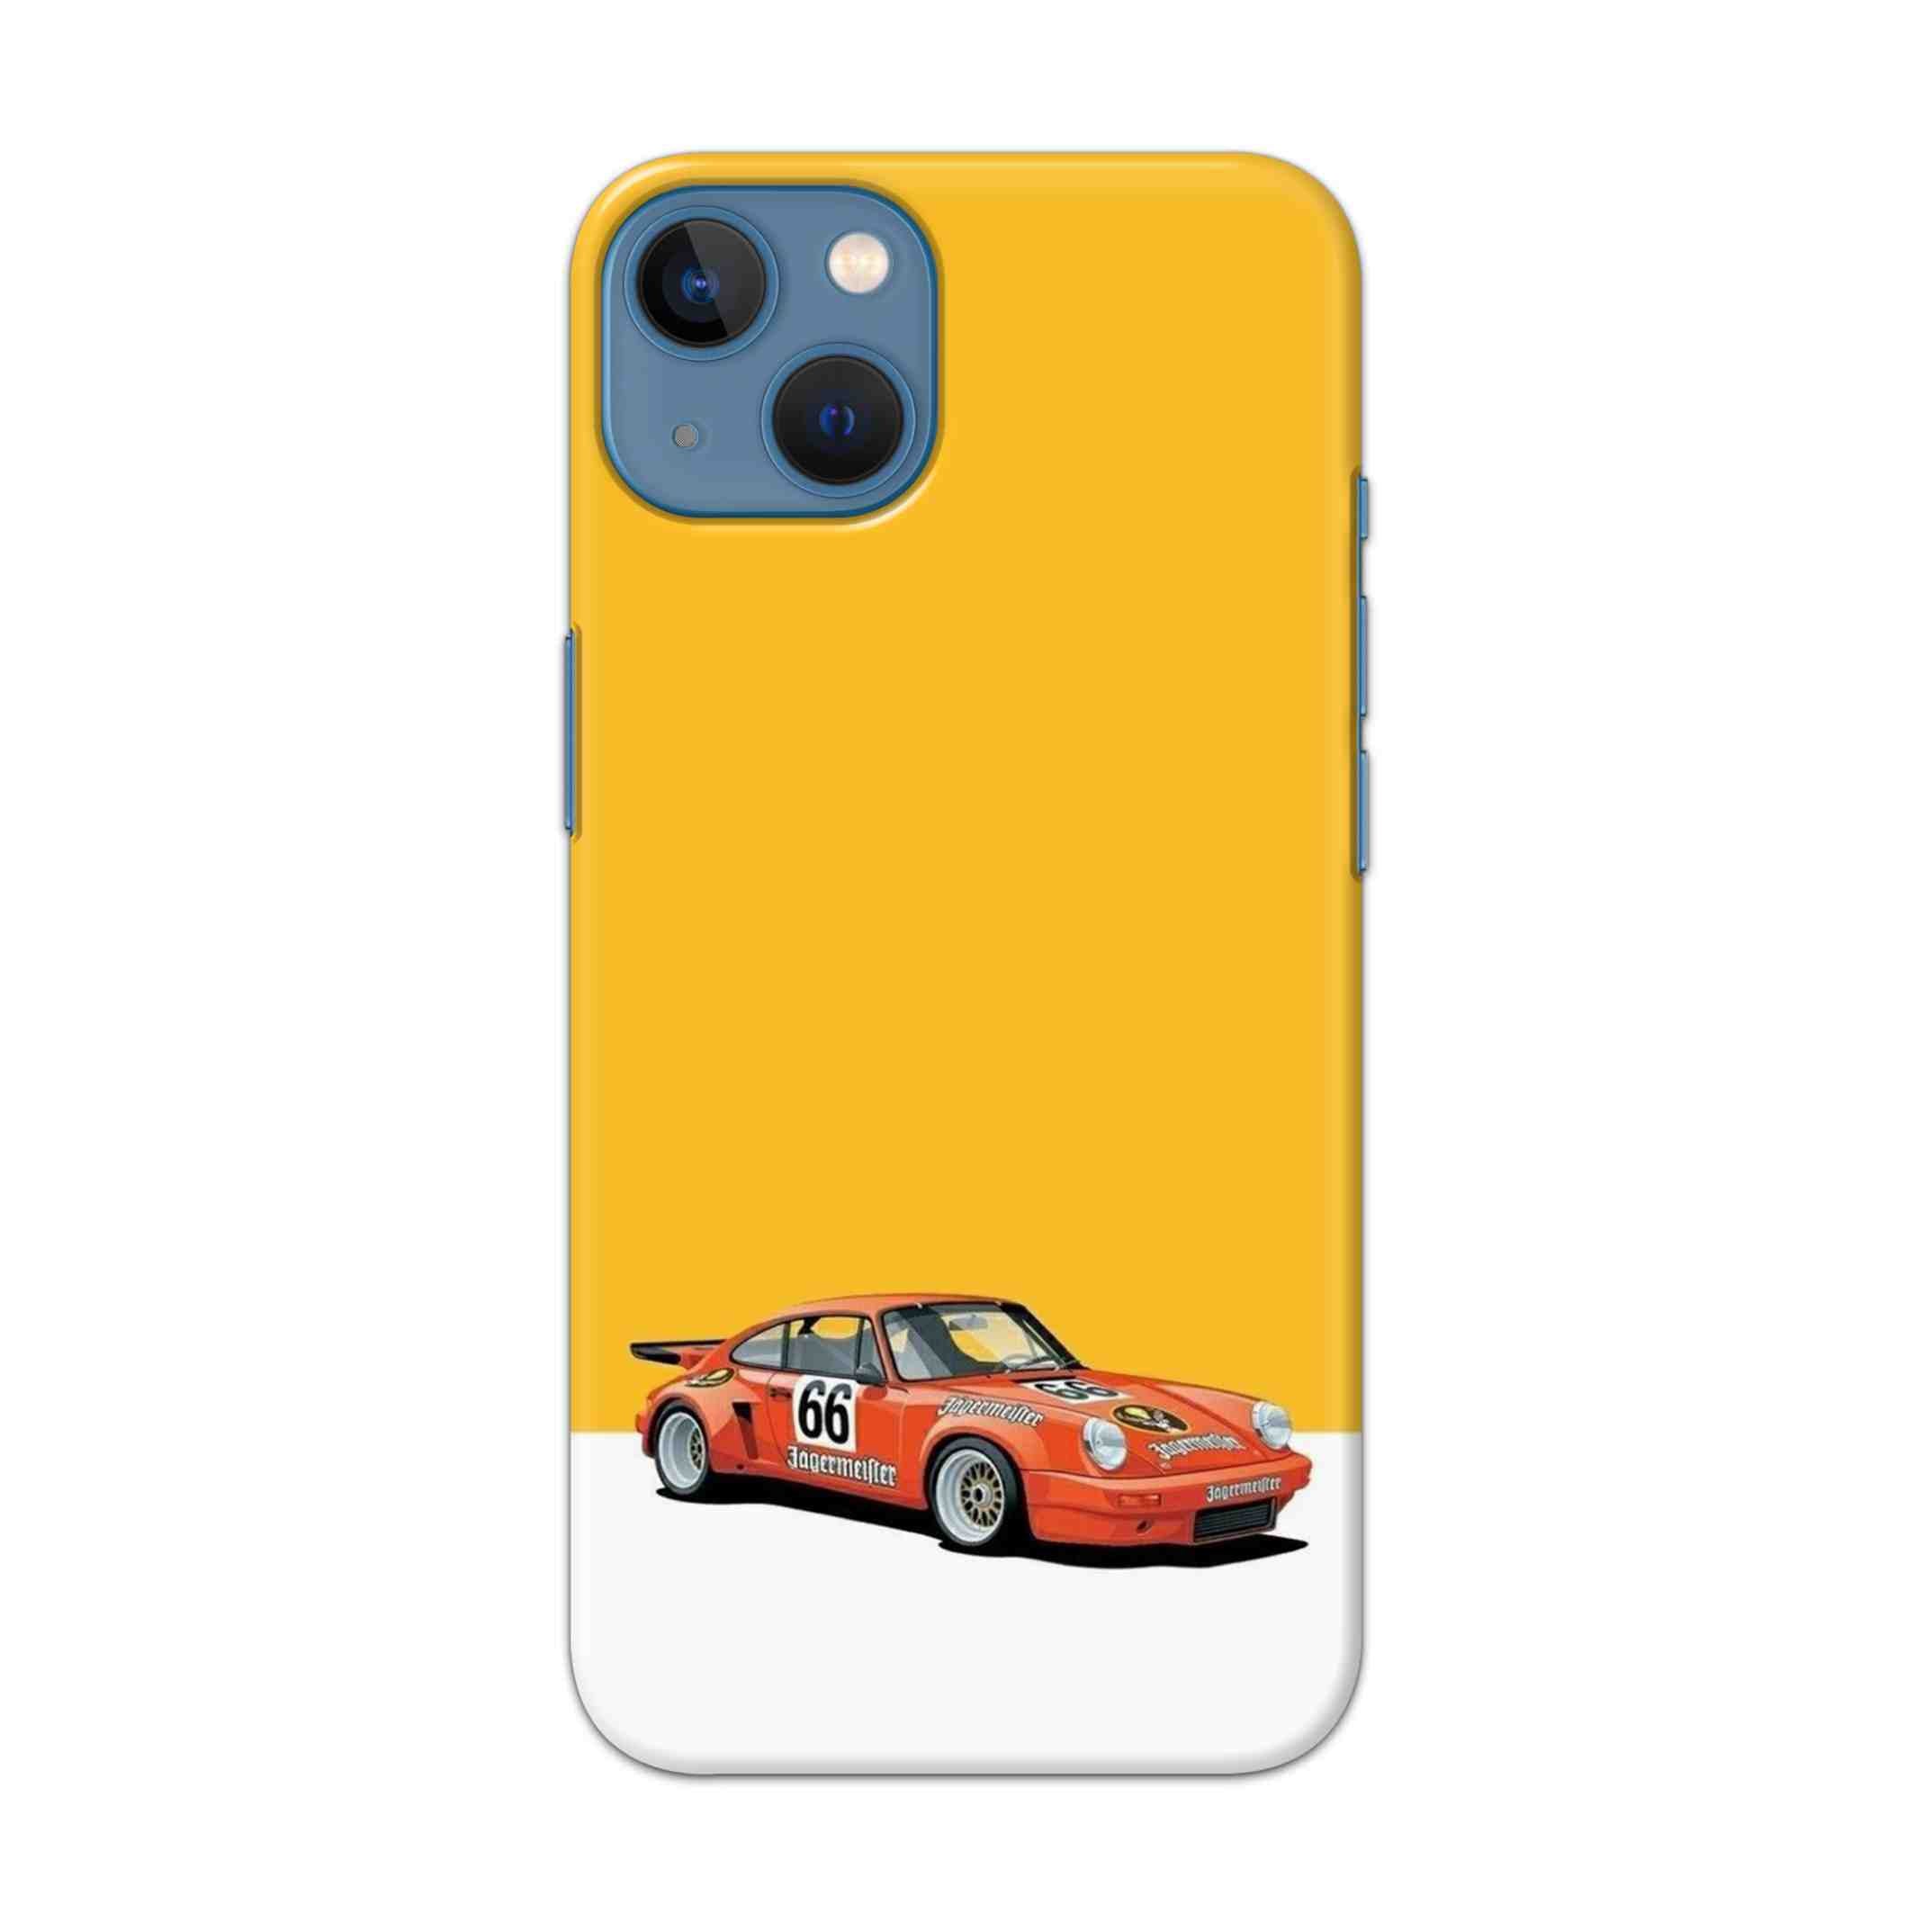 Buy Porche Hard Back Mobile Phone Case/Cover For Apple iPhone 13 Mini Online